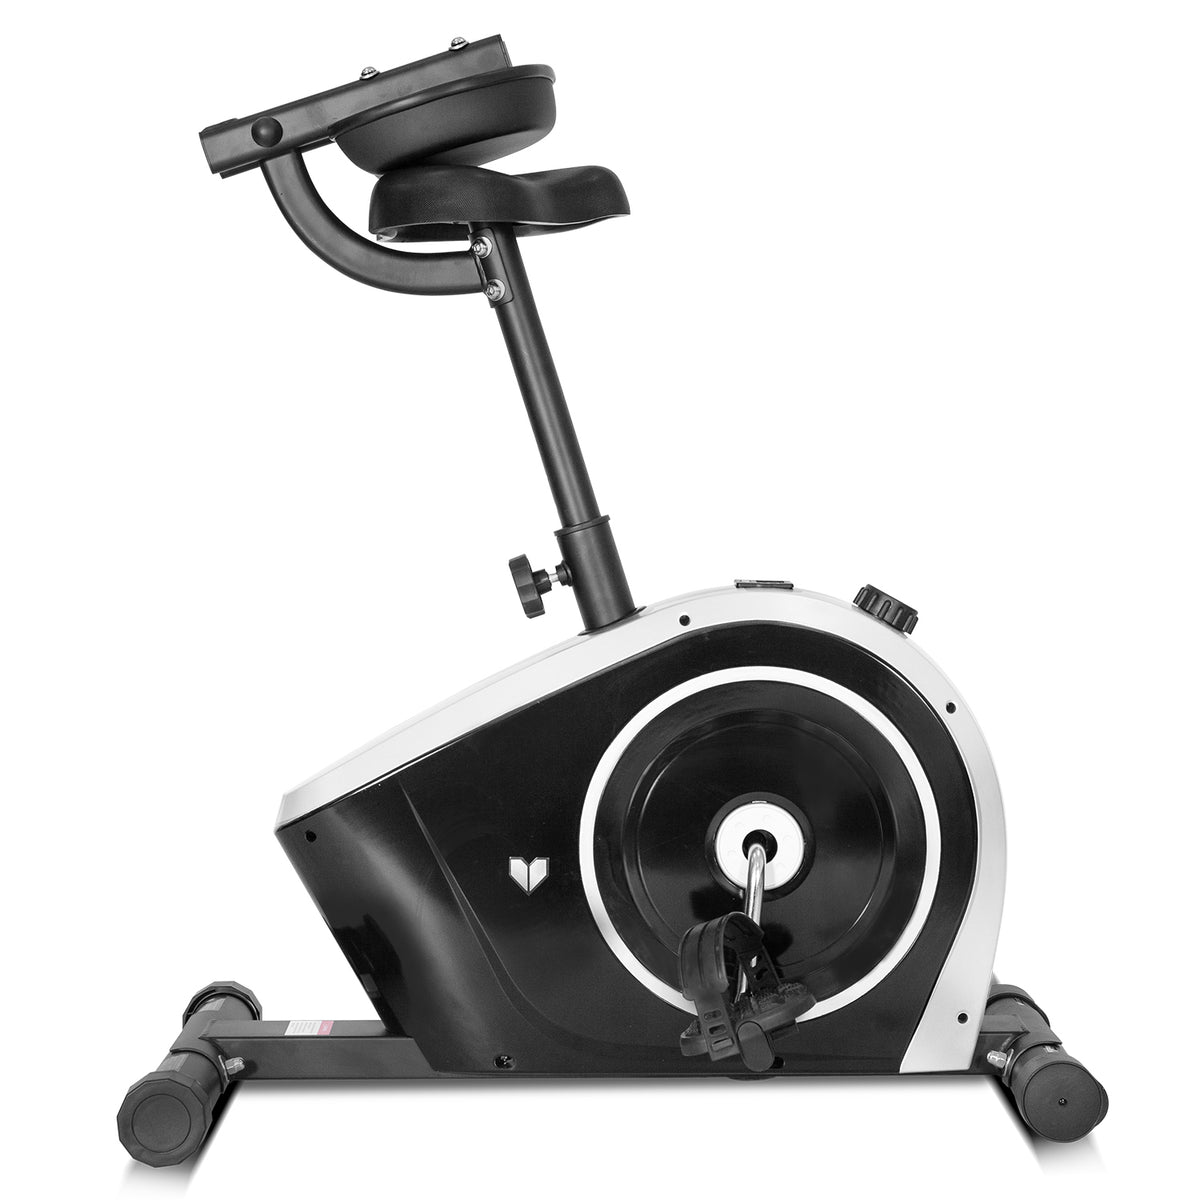 Lifespan Fitness Cyclestation 3 Exercise Bike with ErgoDesk Automatic Standing Desk 180cm in Oak/Black